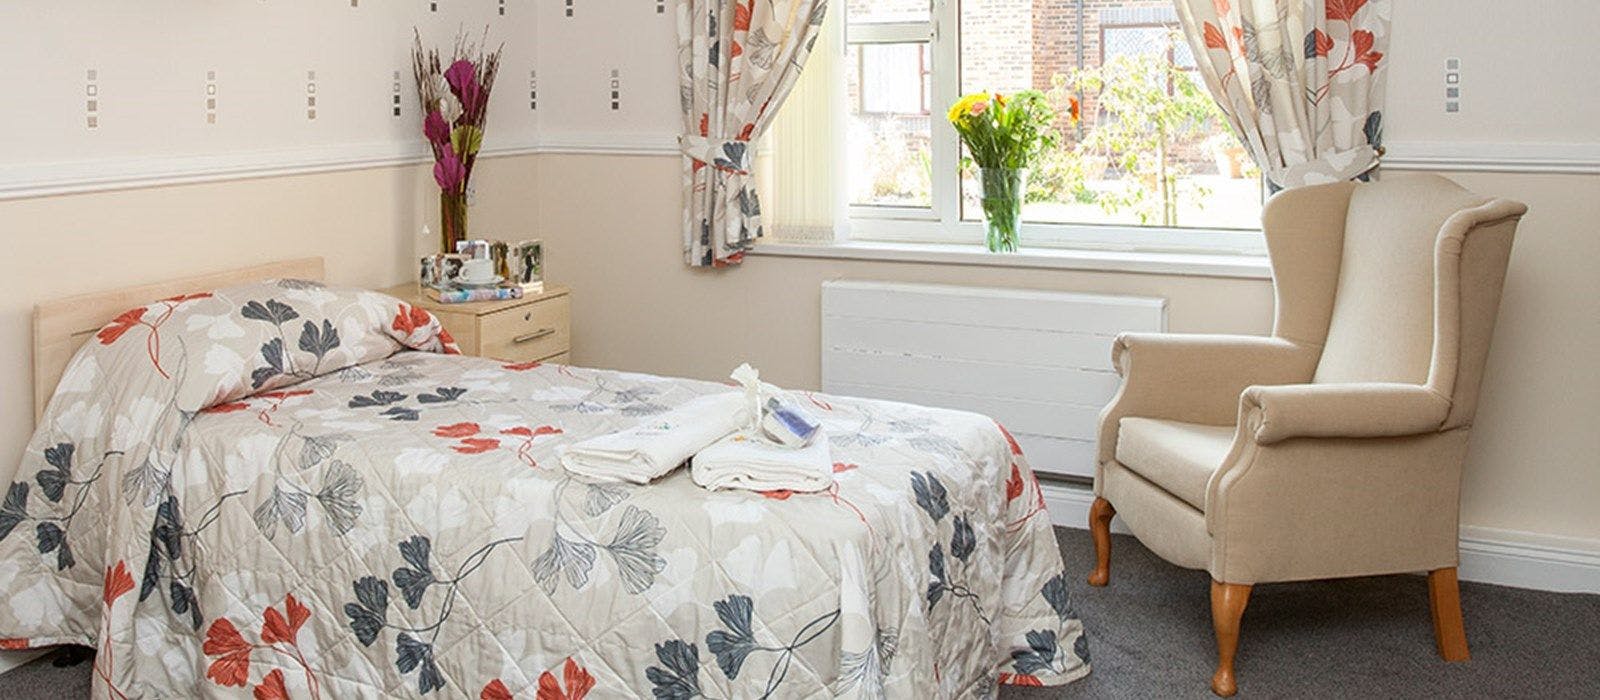 Bedroom at Maple Lodge Care Home in Sunderland, Tyne and Wear